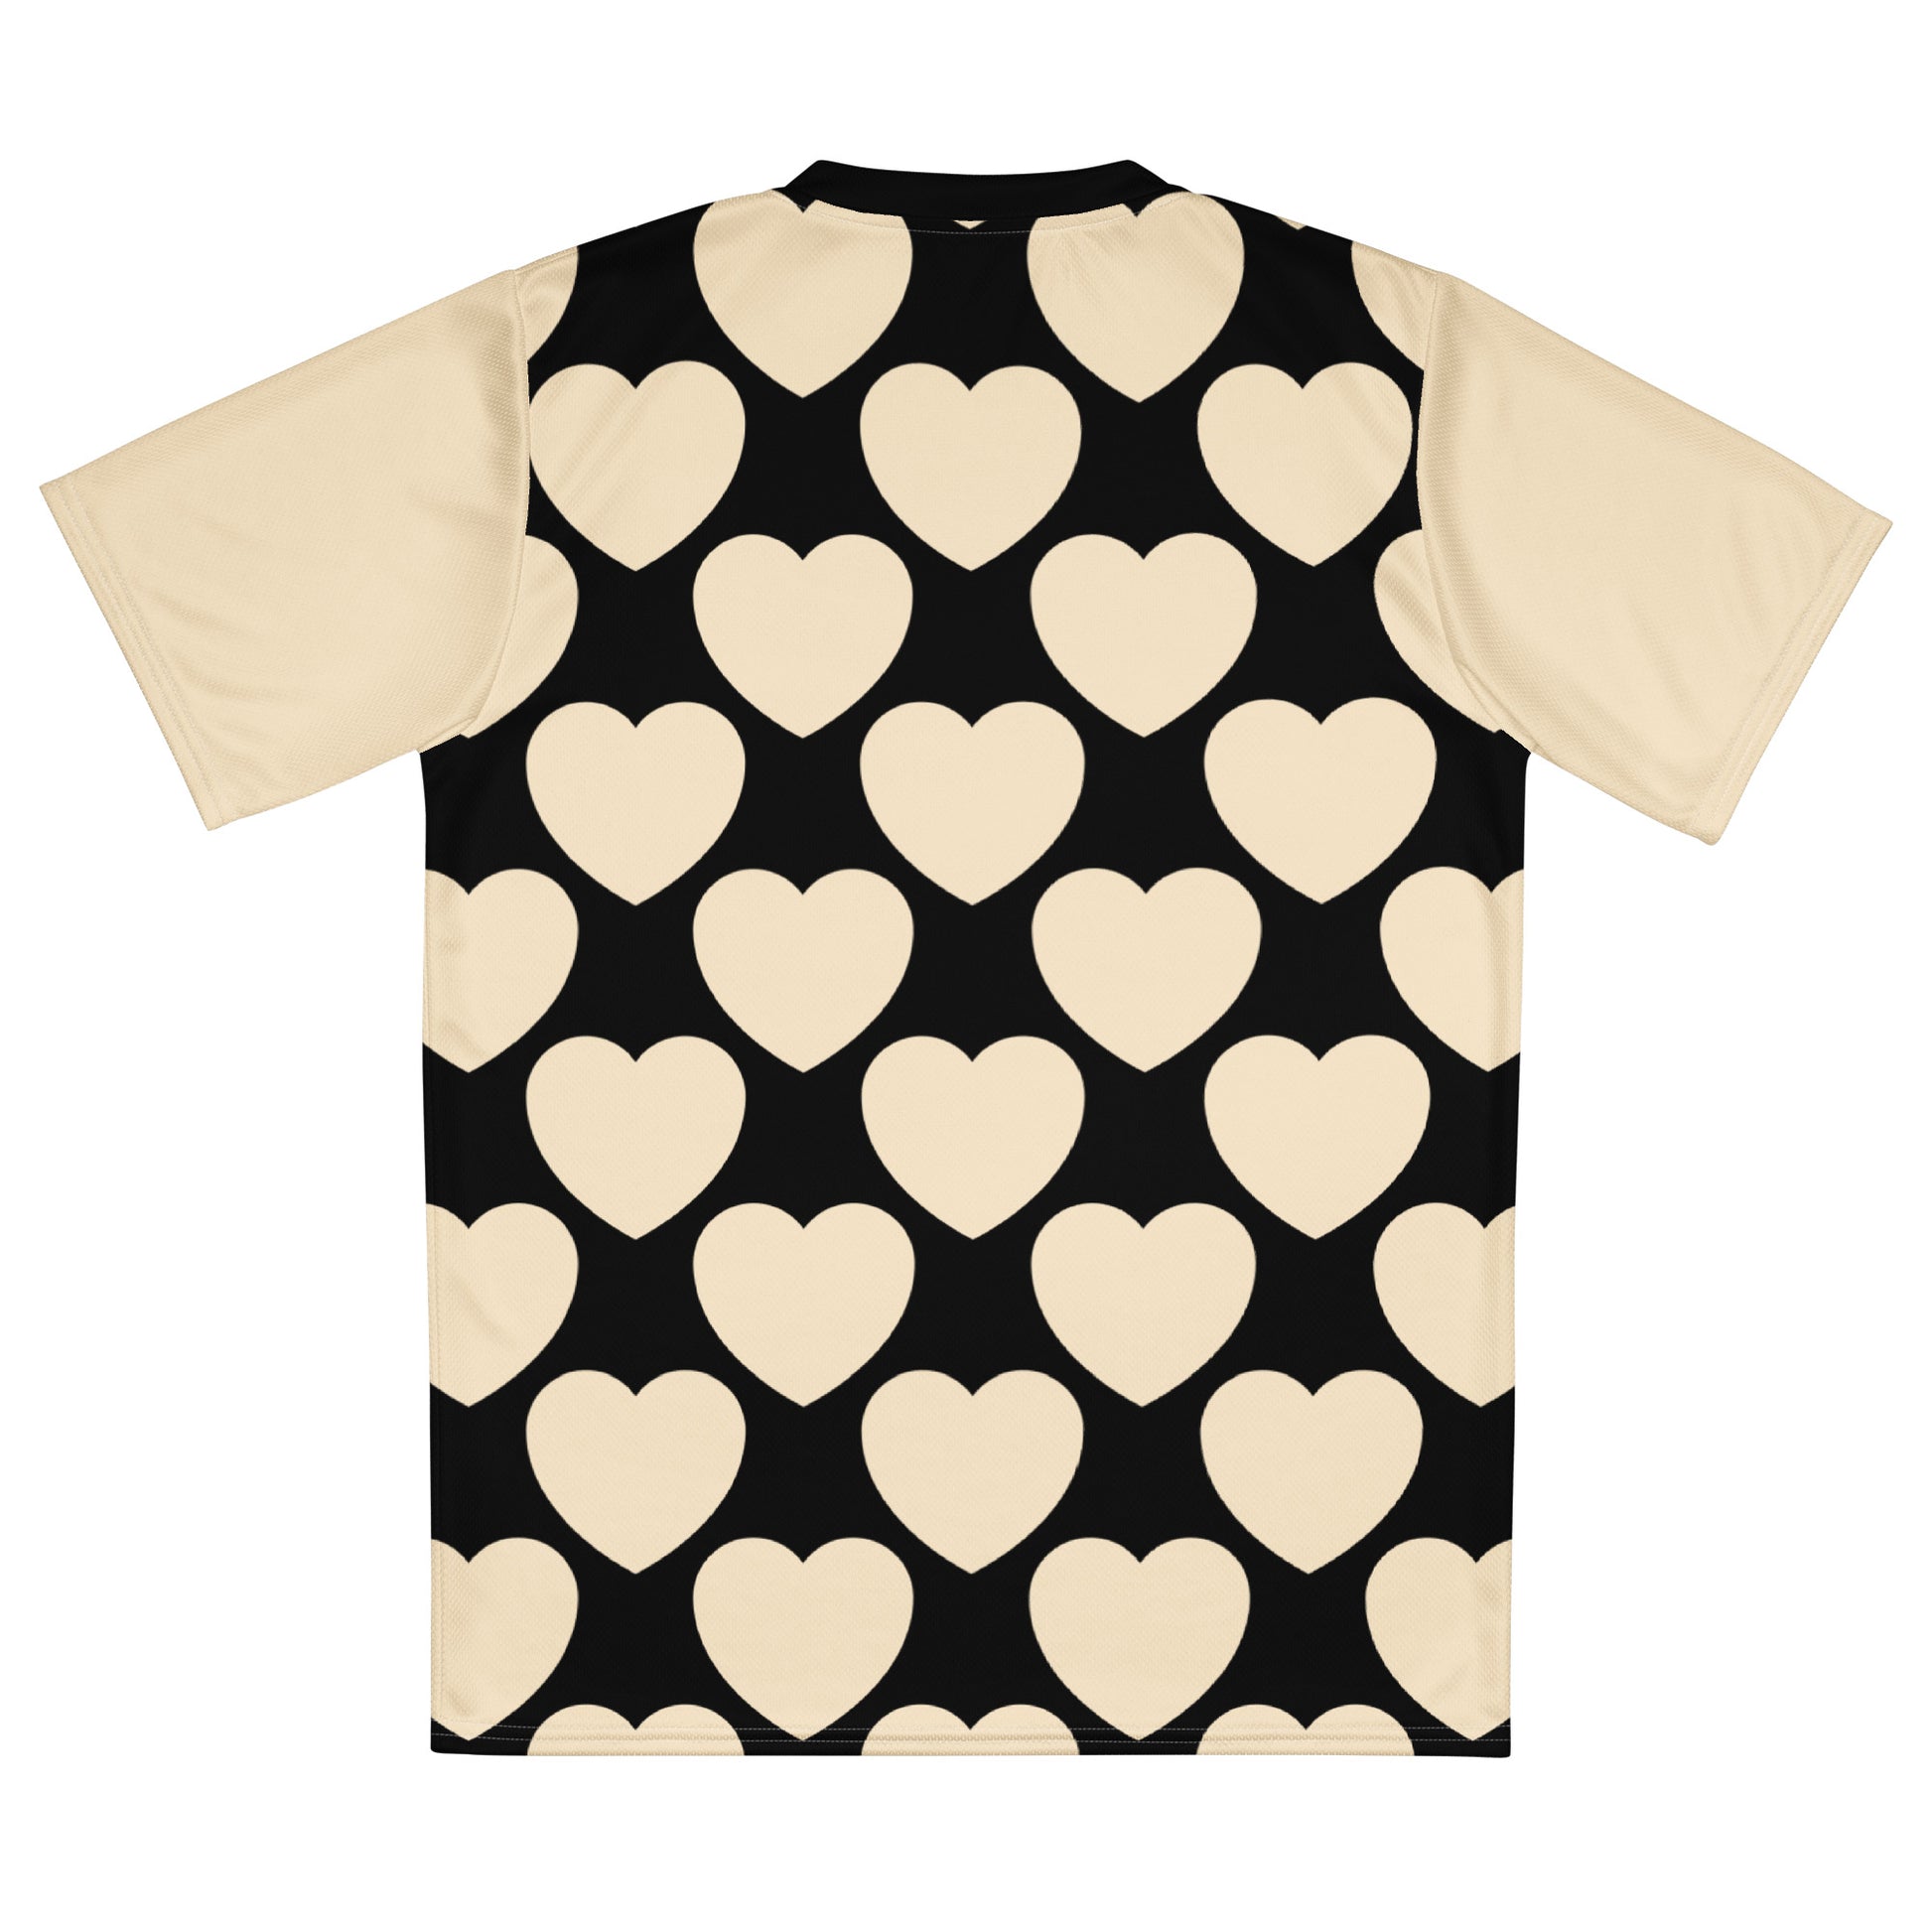 ELLIE LOVE black - Recycled unisex sports jersey